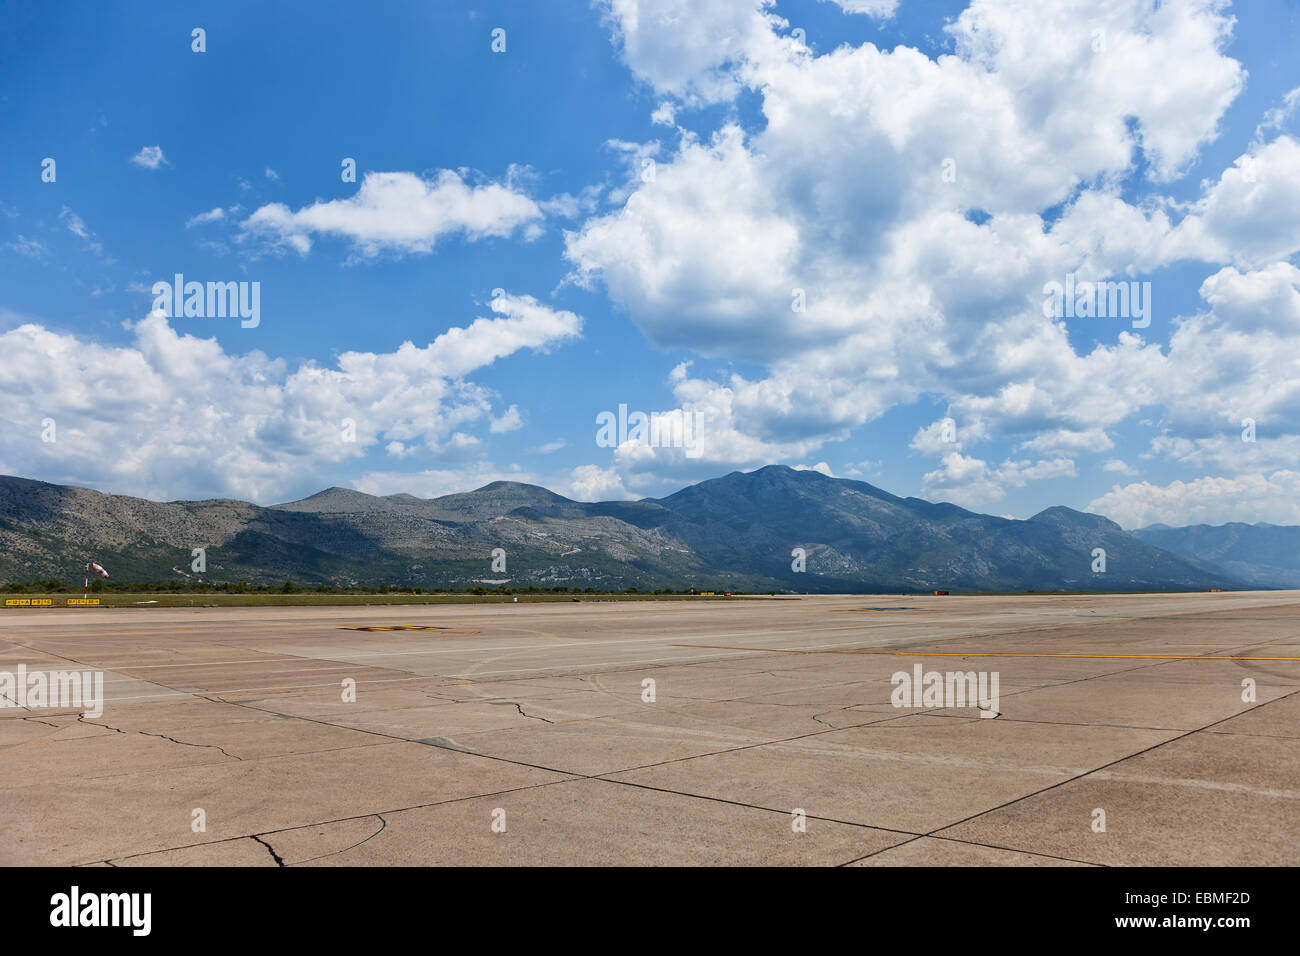 Runway of Dubrovnik Airport on a background of mountains. Stock Photo